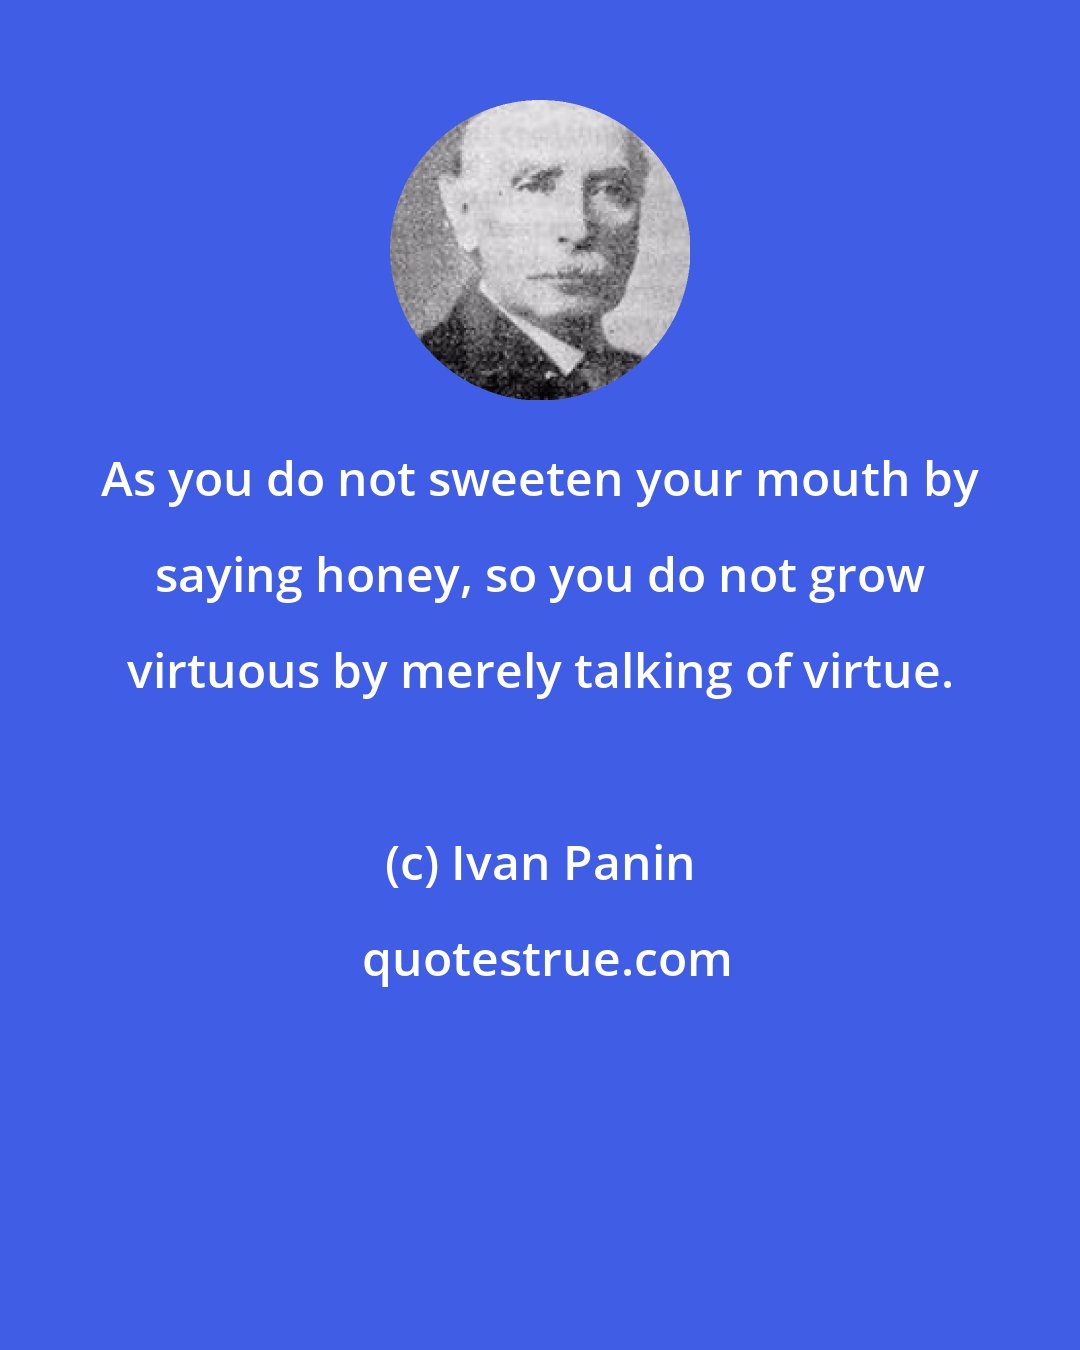 Ivan Panin: As you do not sweeten your mouth by saying honey, so you do not grow virtuous by merely talking of virtue.